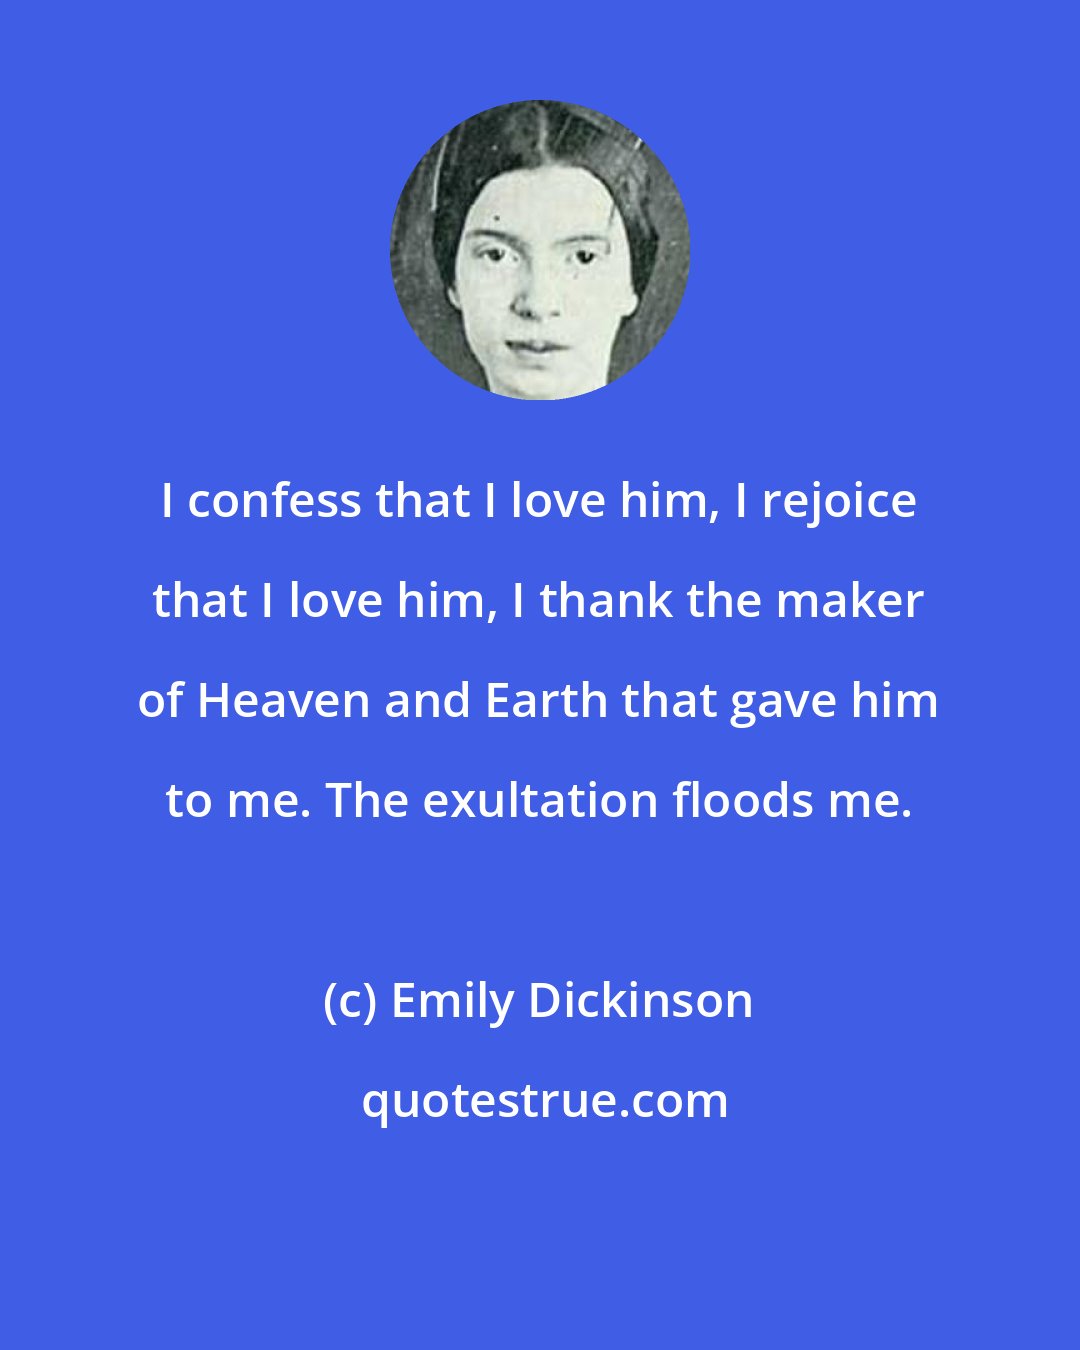 Emily Dickinson: I confess that I love him, I rejoice that I love him, I thank the maker of Heaven and Earth that gave him to me. The exultation floods me.